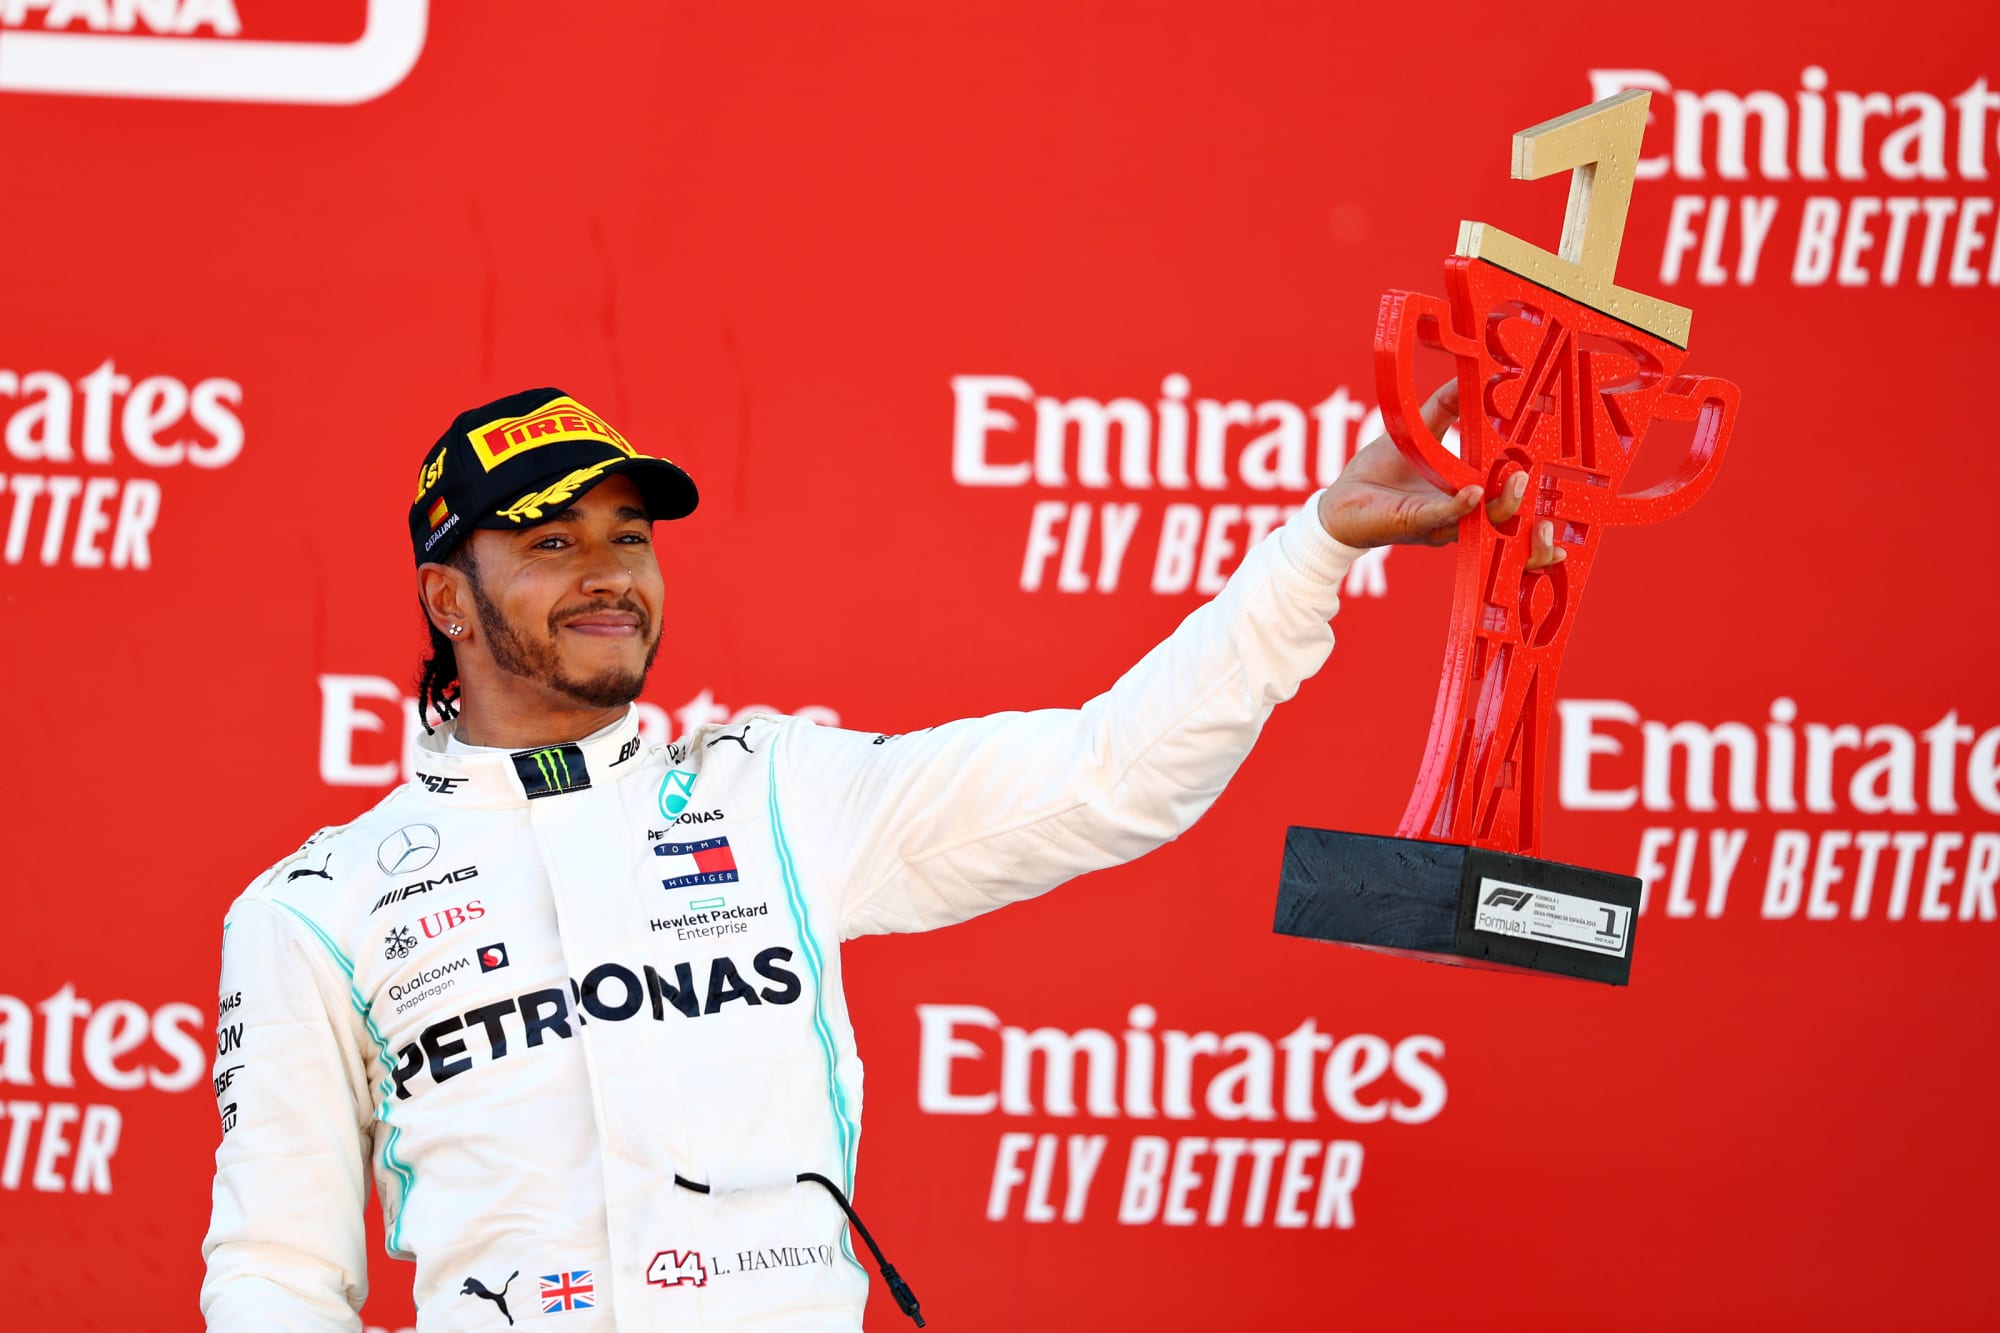 Formula 1 Can Mercedes win all 21 races in the 2019 season?